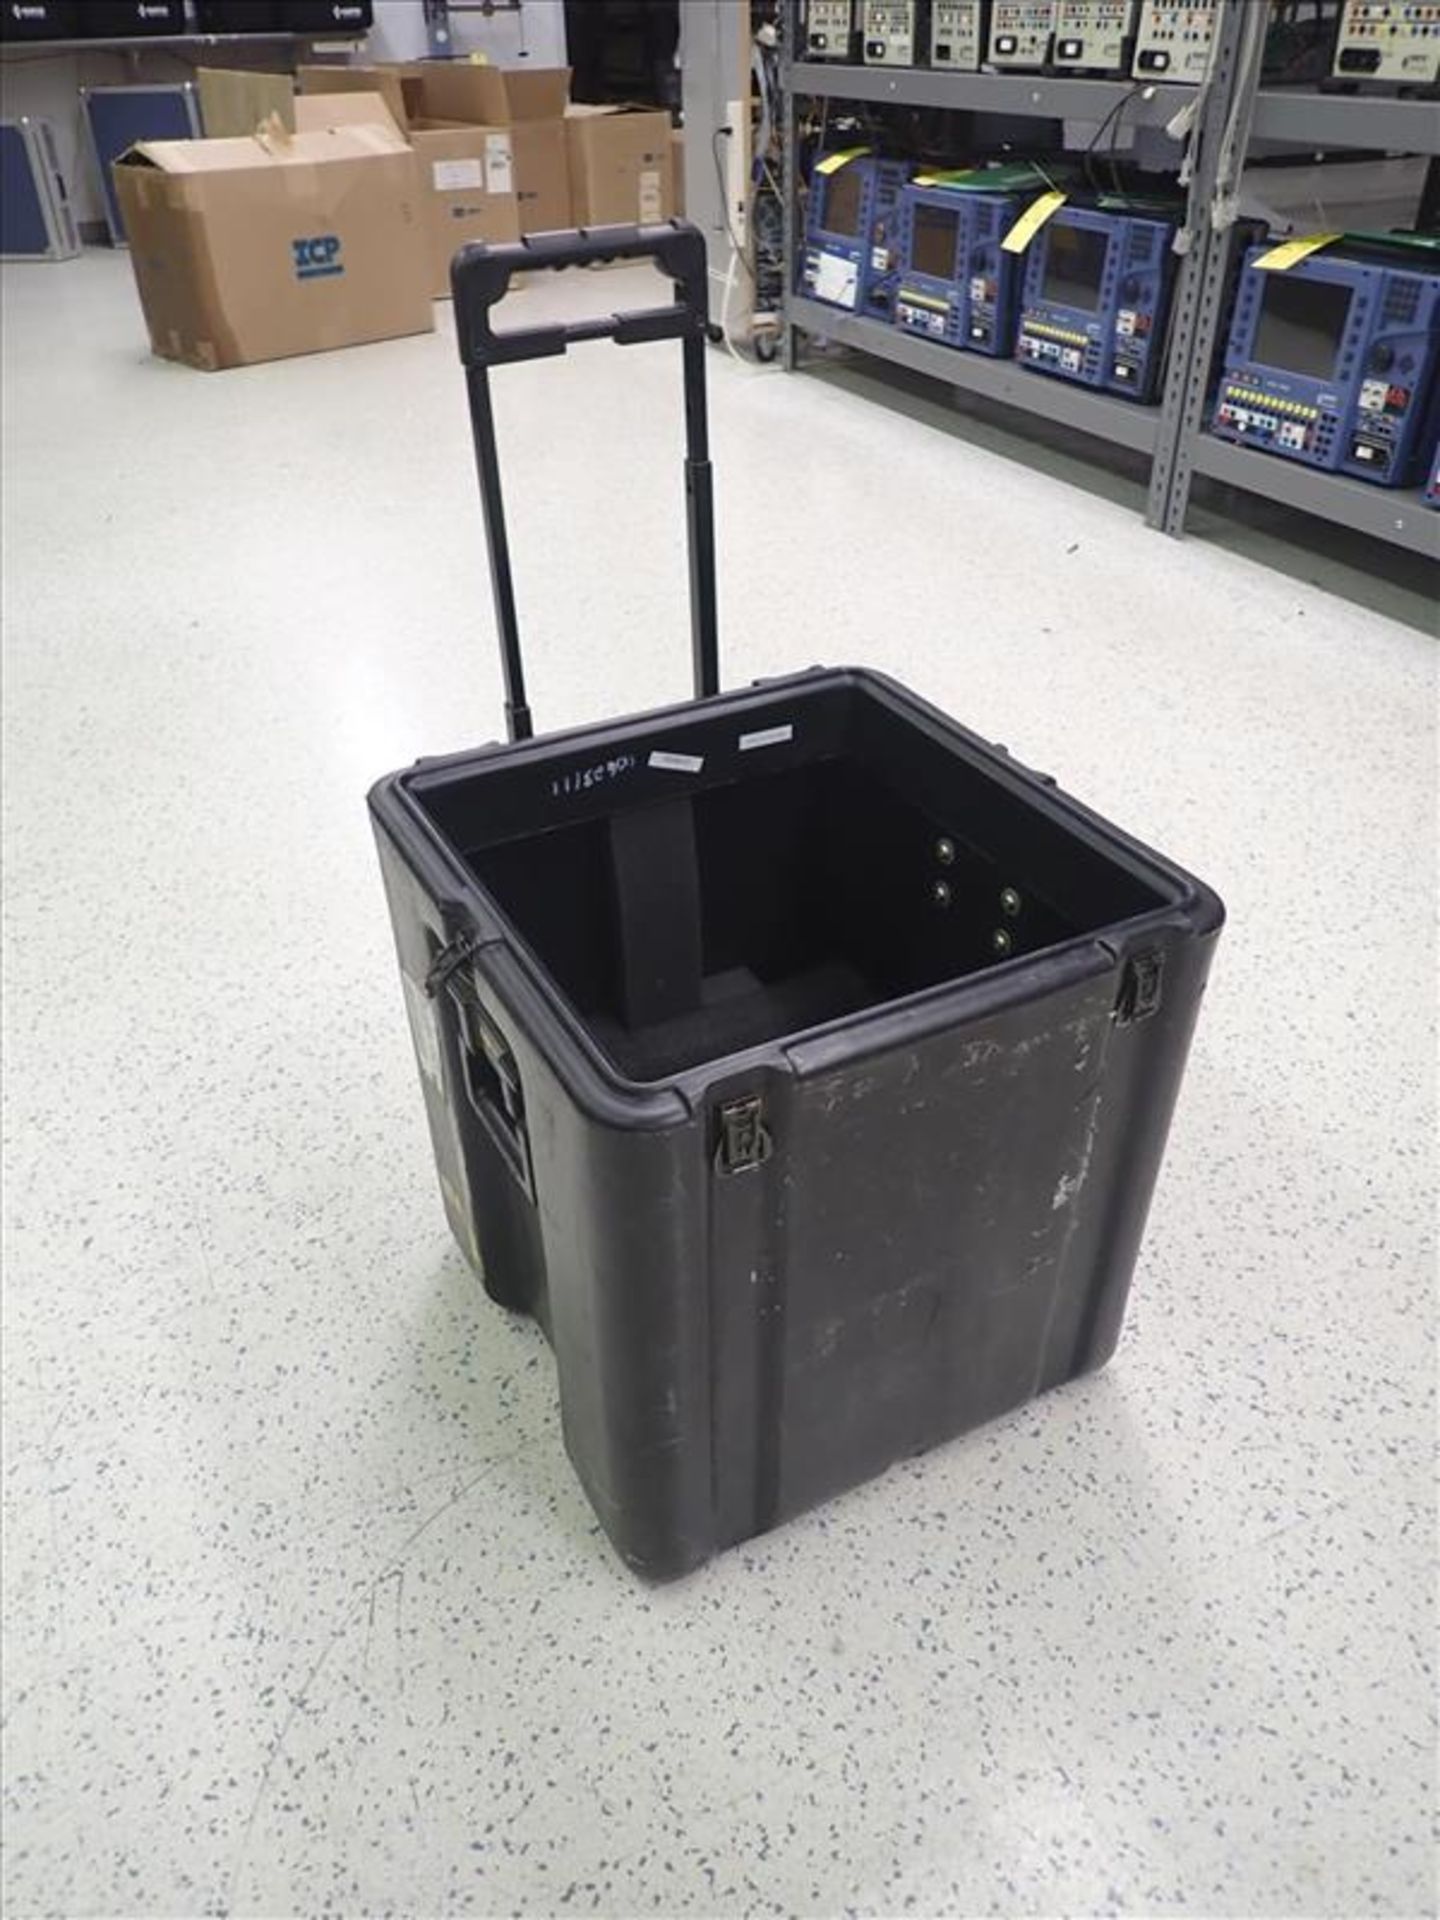 Hardigg Pelican Hard Case, approx. 16 in. x 16 in. x 18 in. deep, rolling - Image 2 of 3